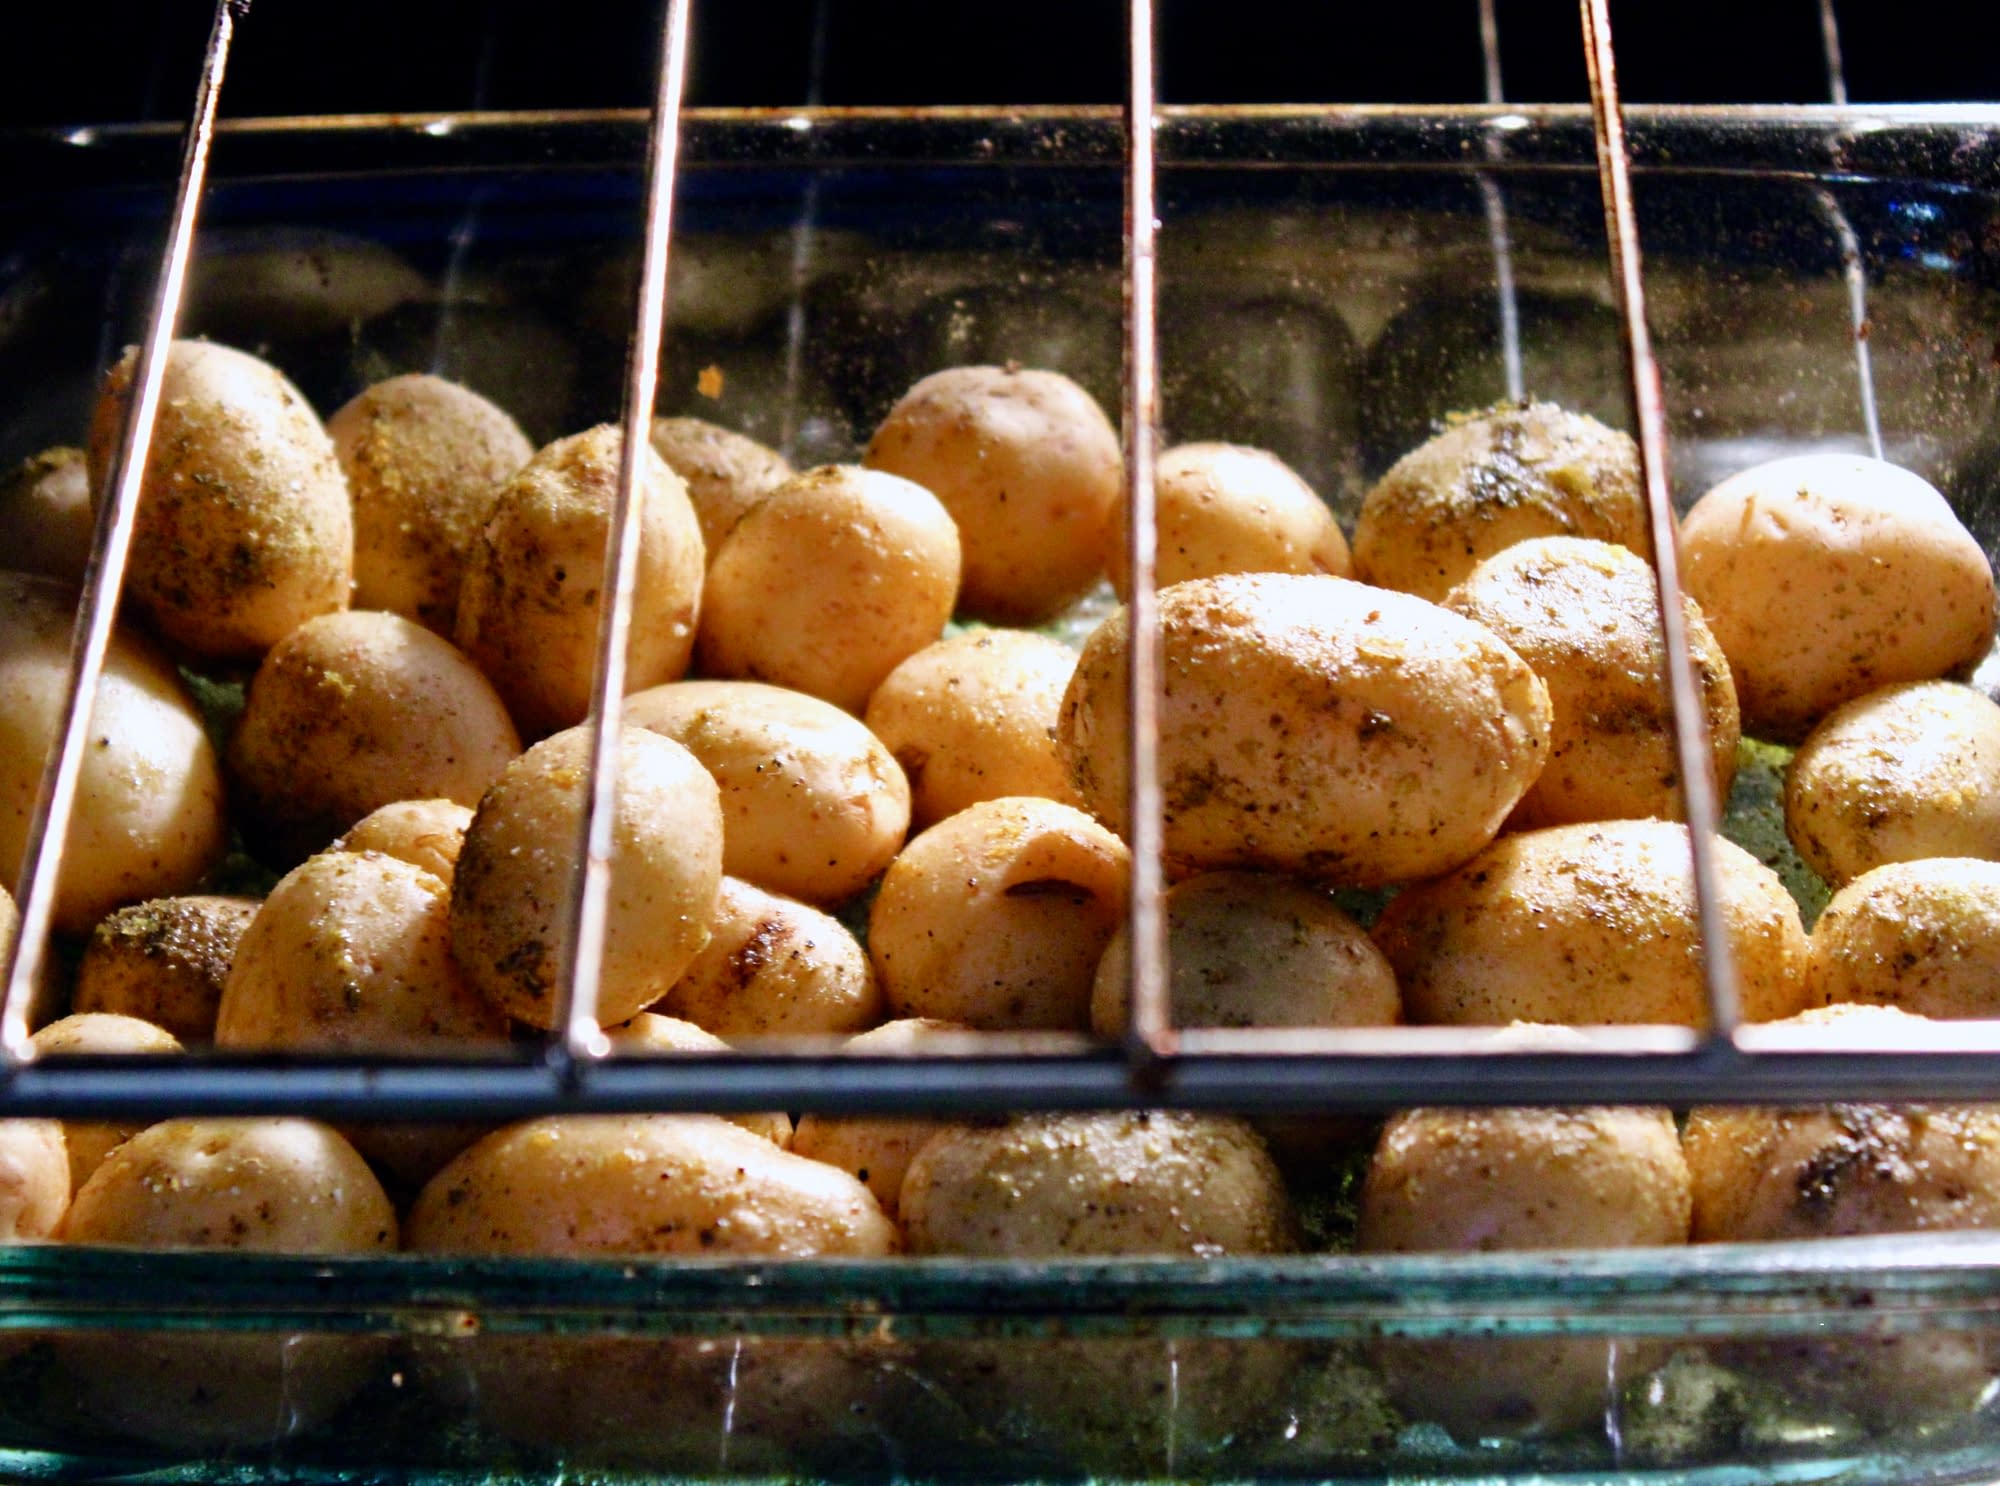 Potatoes in the oven.